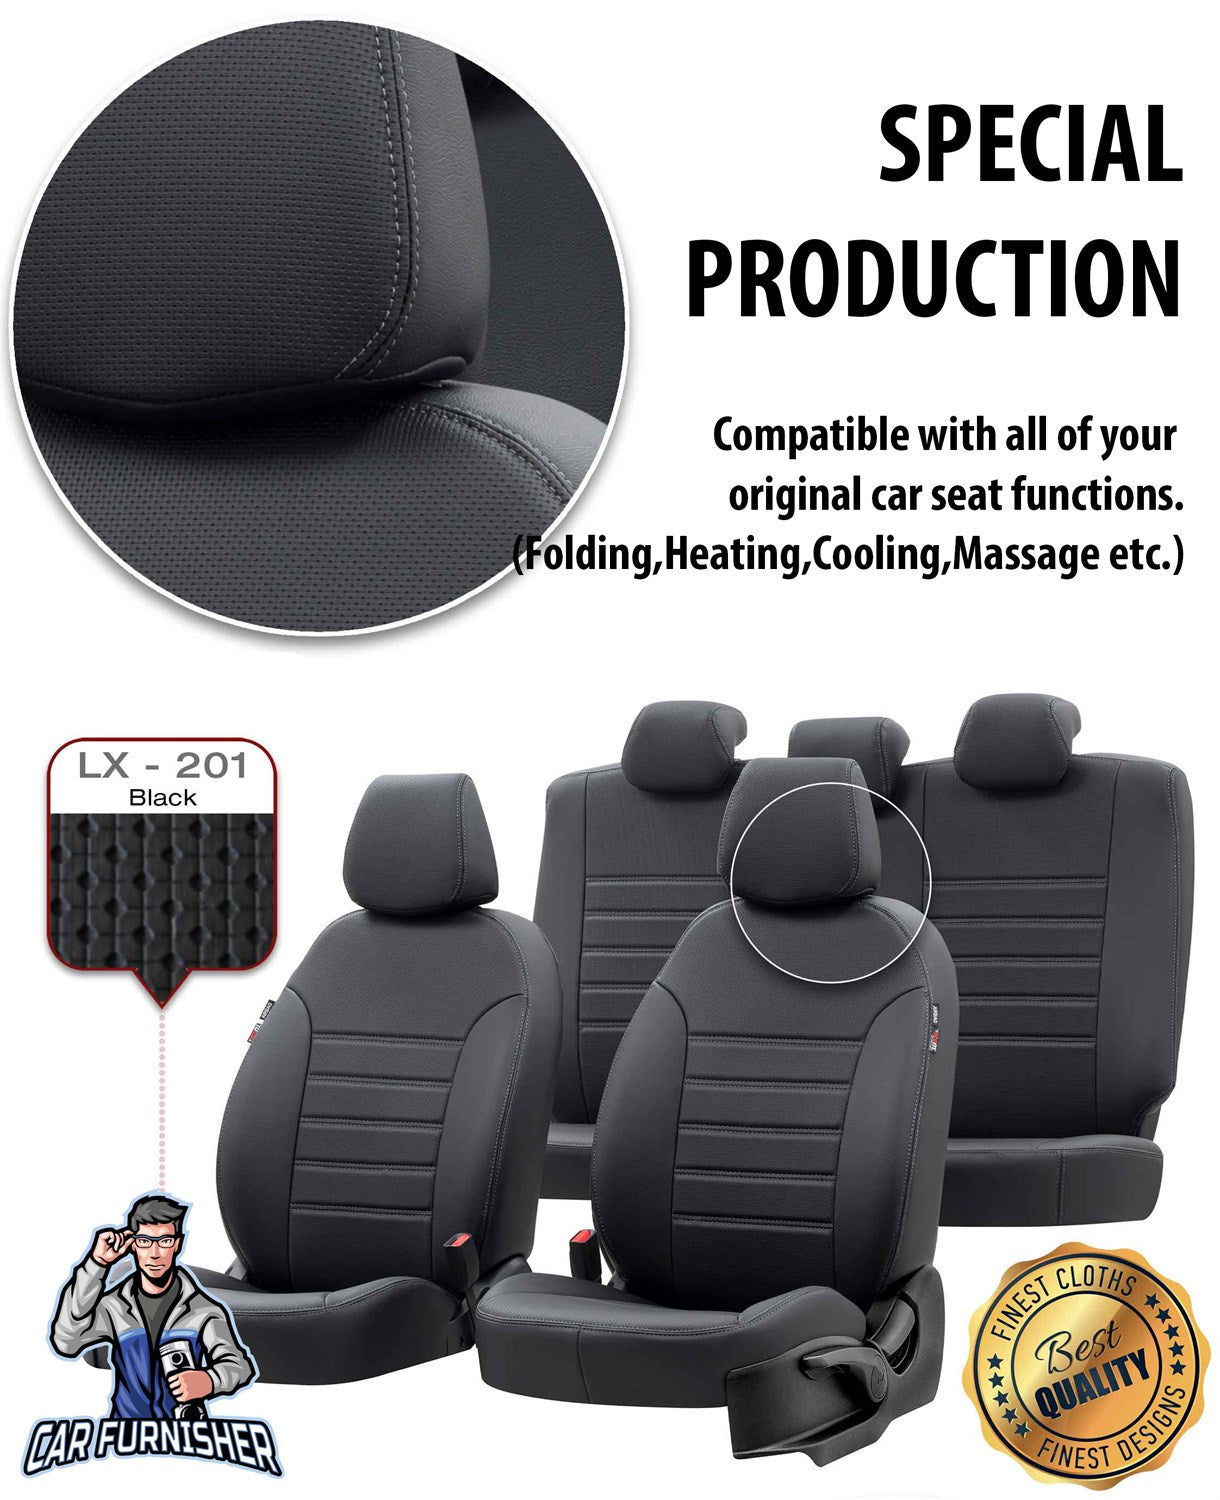 Volkswagen Crafter Seat Cover New York Leather Design Smoked Leather